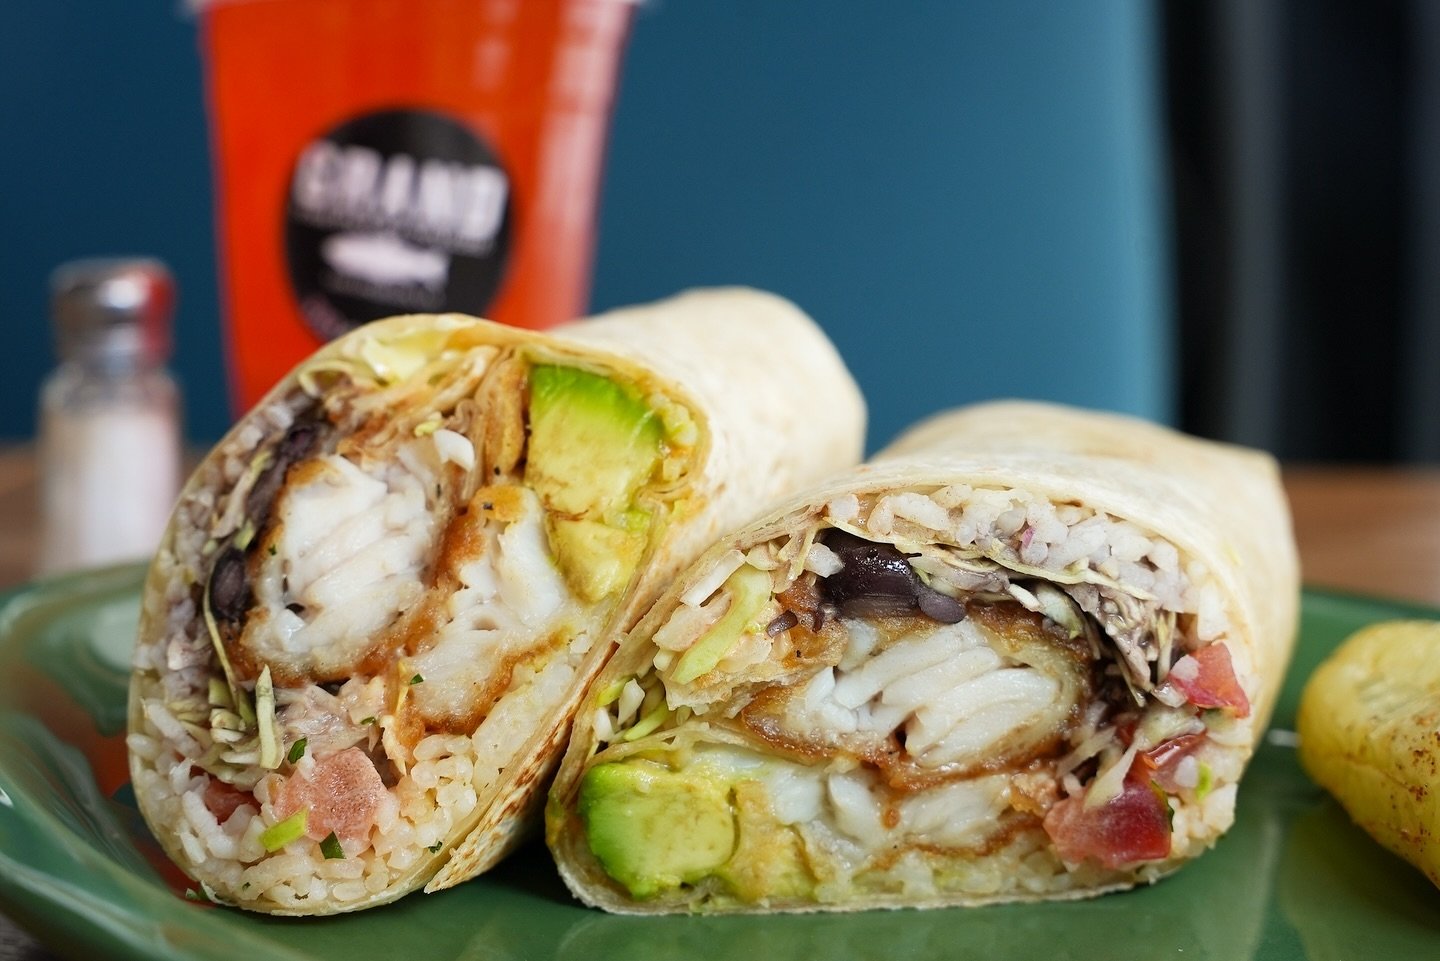 Dive into flavor with our irresistible fried fish burrito &ndash; a crunchy, flavorful delight wrapped up just for you 🌯 🧑&zwj;🍳 

#gardena #southbay #burritolovers #familyownedbusiness